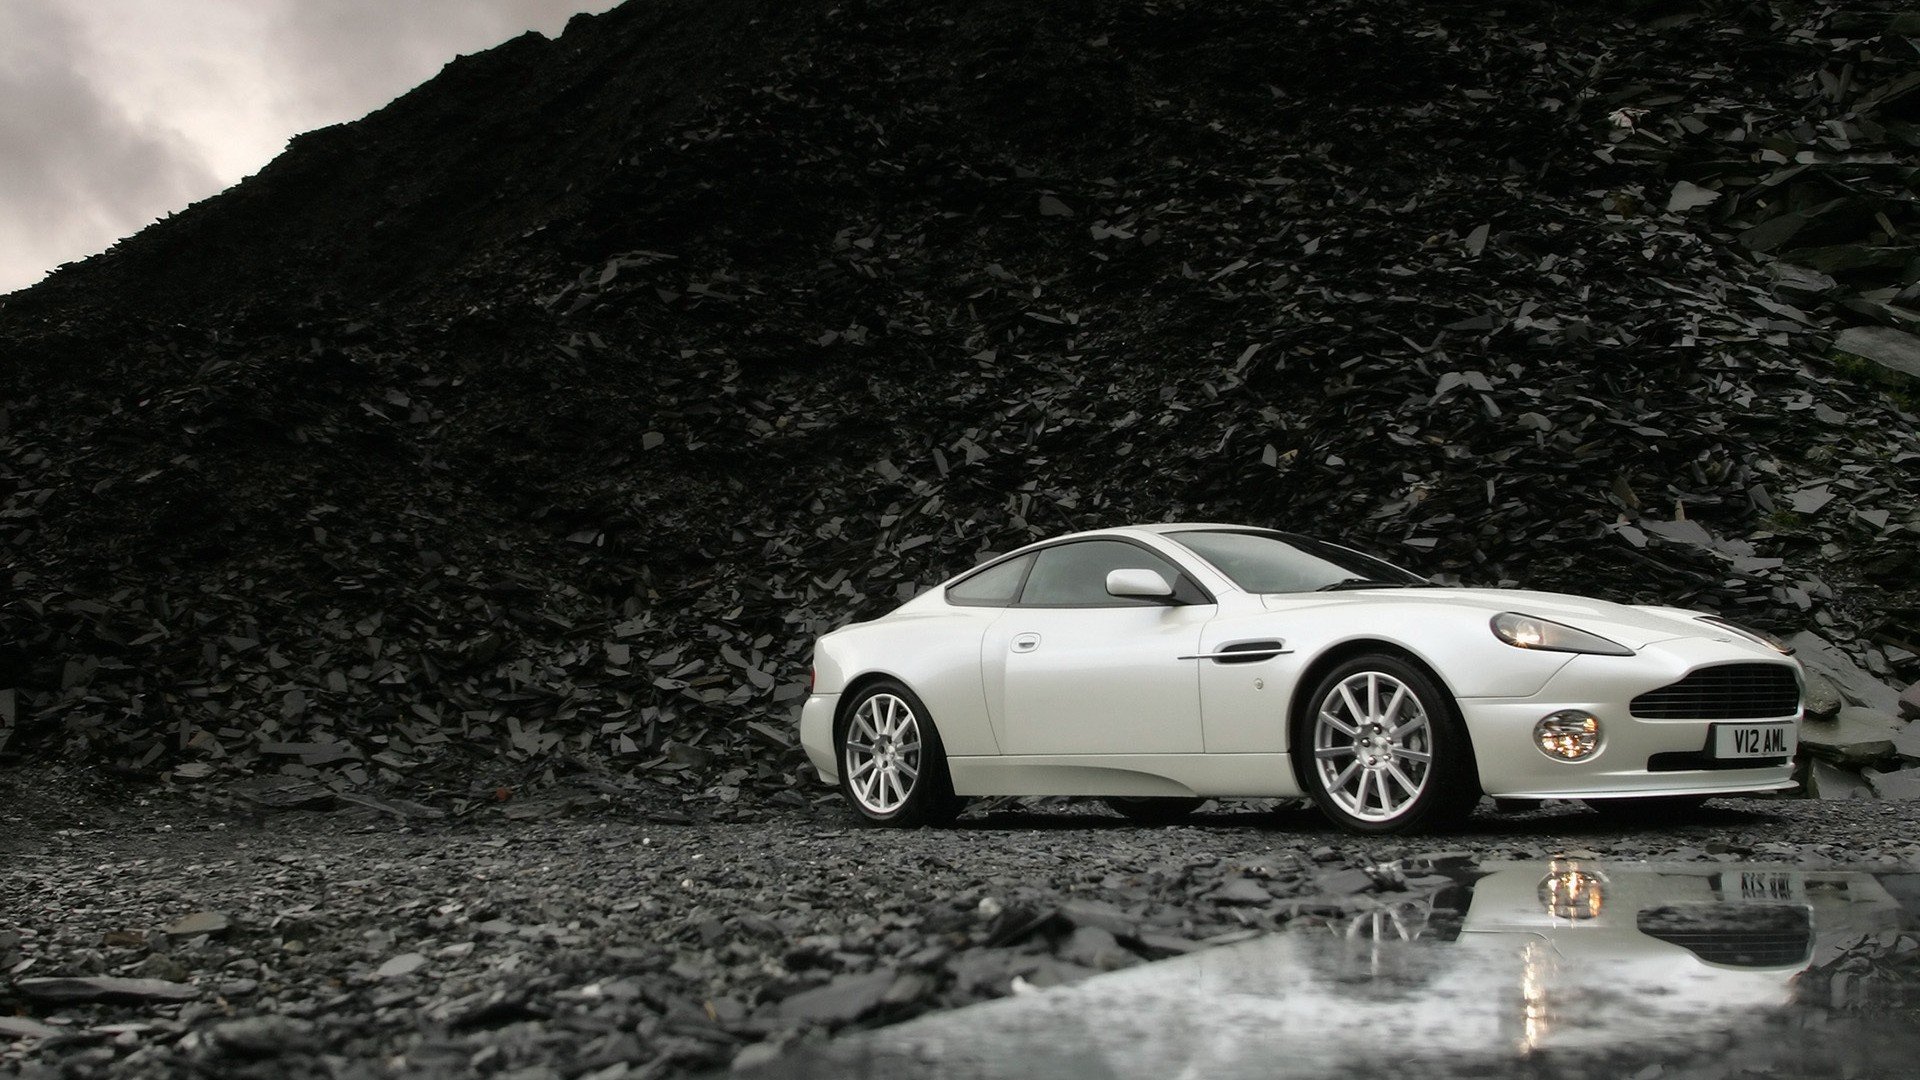 white, Cars, Aston, Martin, Front, Wheels, Races, Racing, Cars, Speed, Automobiles Wallpaper